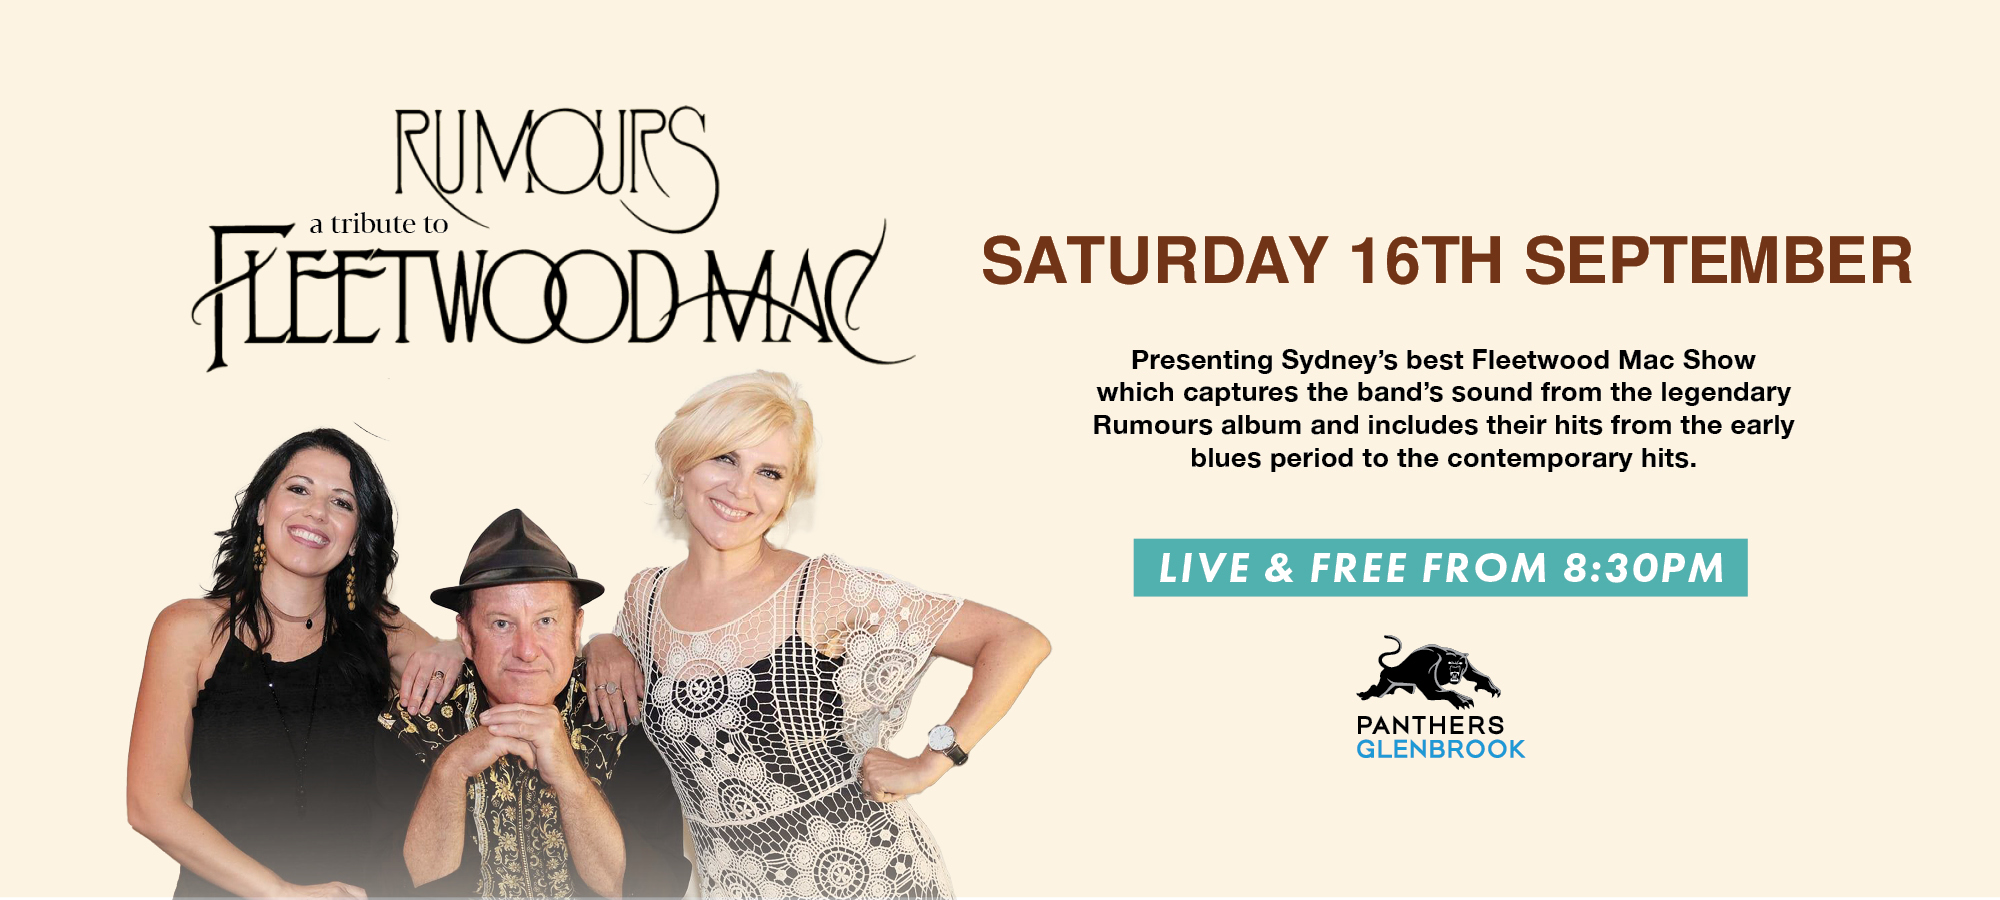 Rumours – A Tribute to Fleetwood Mac